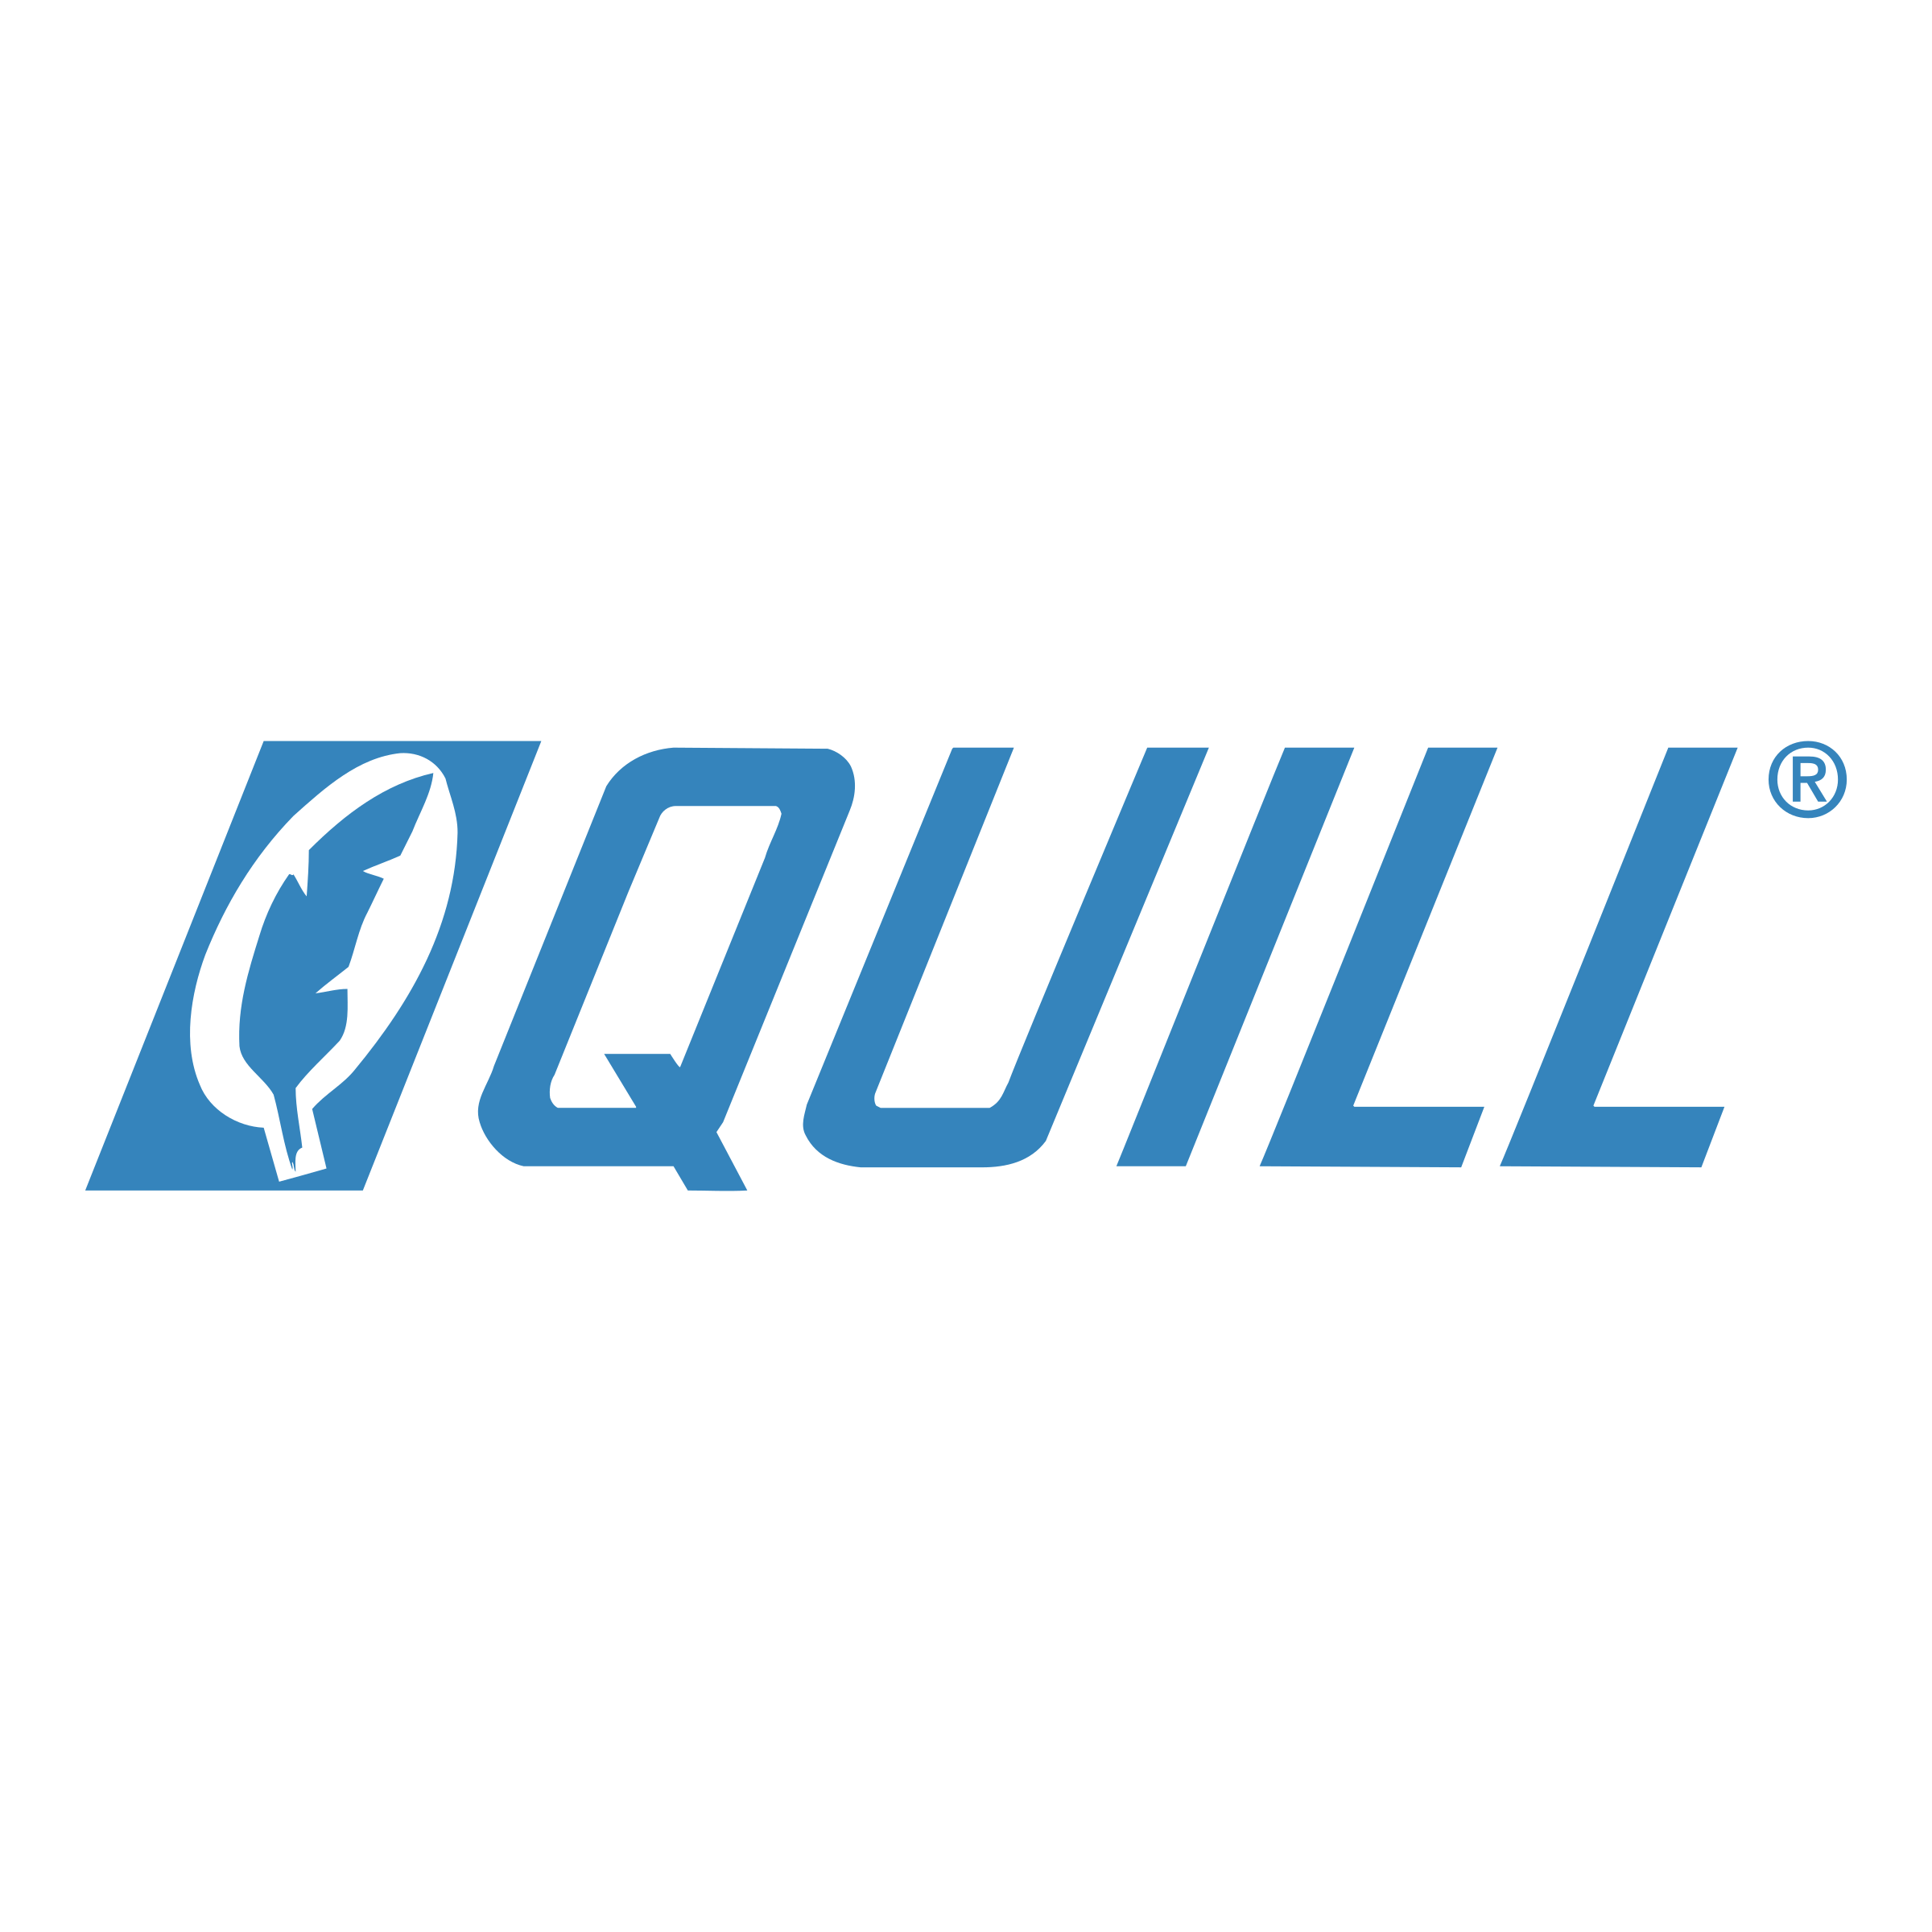 Quill Logo - Quill Logo PNG Transparent & SVG Vector - Freebie Supply